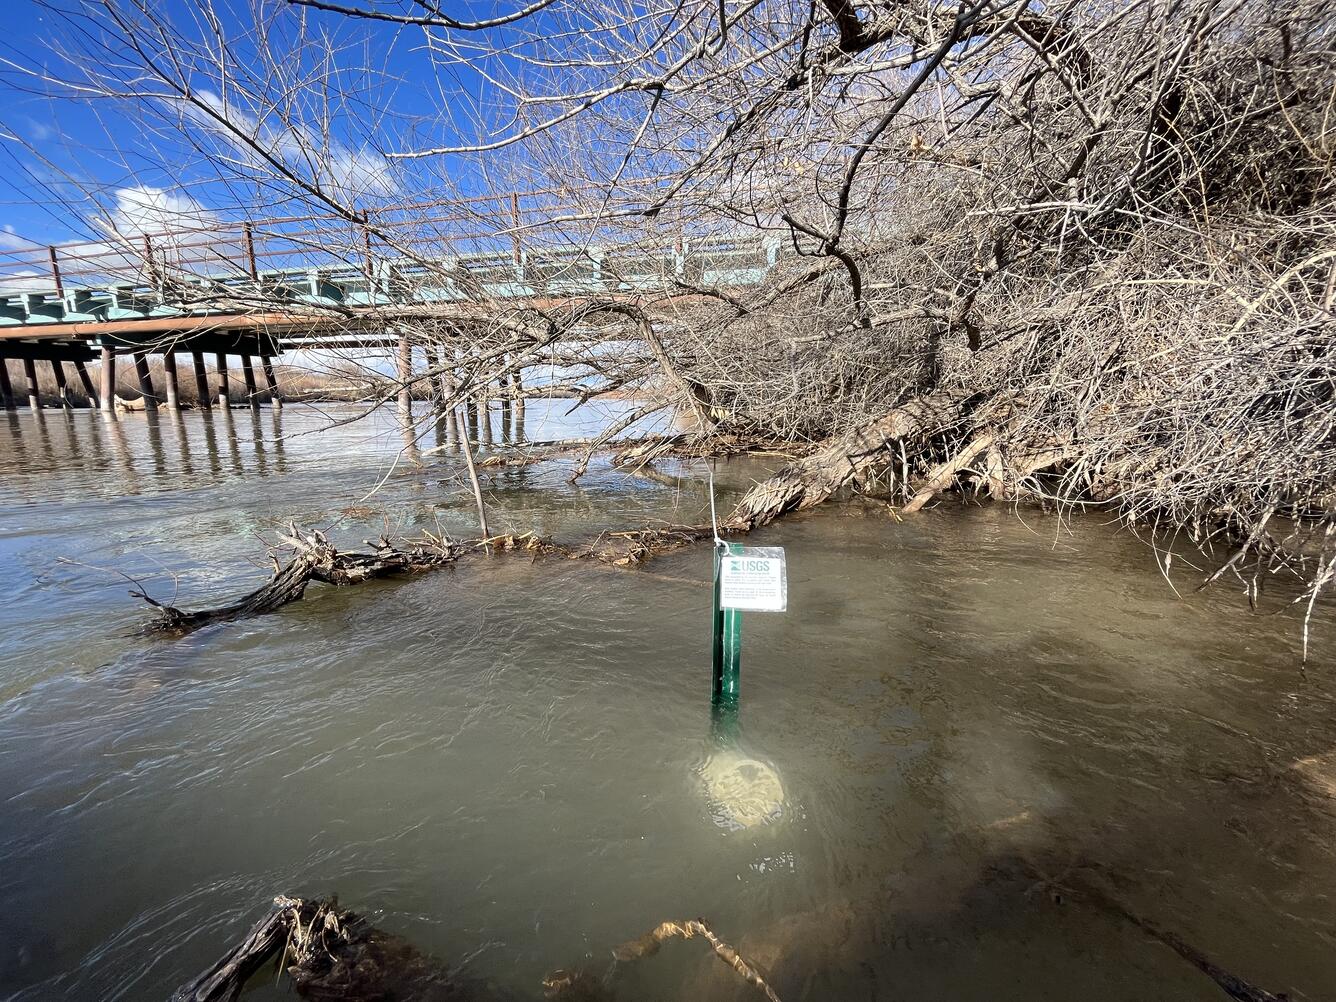 USGS scientists found "forever chemicals" (PFAS) in New Mexico's water, with the highest concentrations found downstream of urban areas, indicating cities as a major source of this pollution.